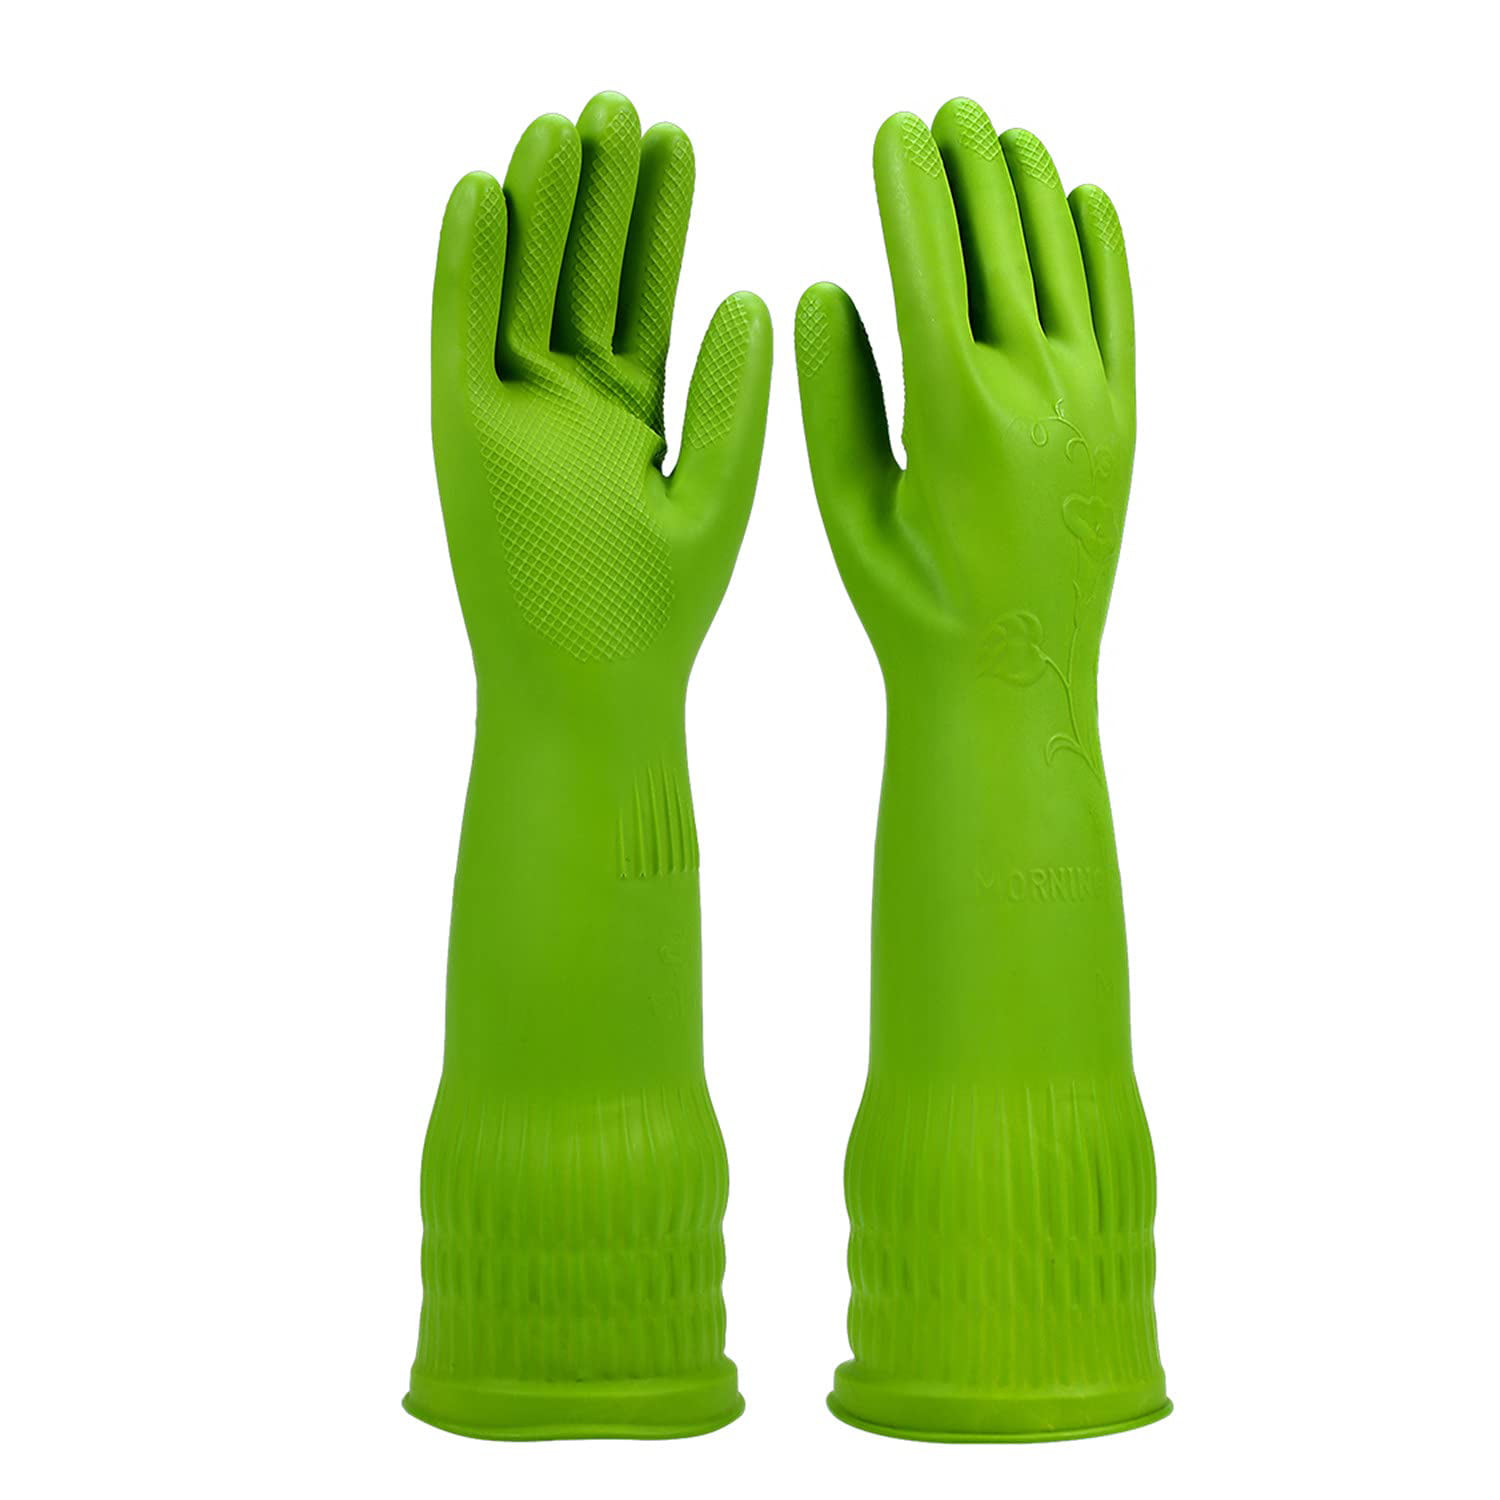 Washing Up Size Medium. Details about   2x  Pair Green Rubber Gloves Household Cleaning 